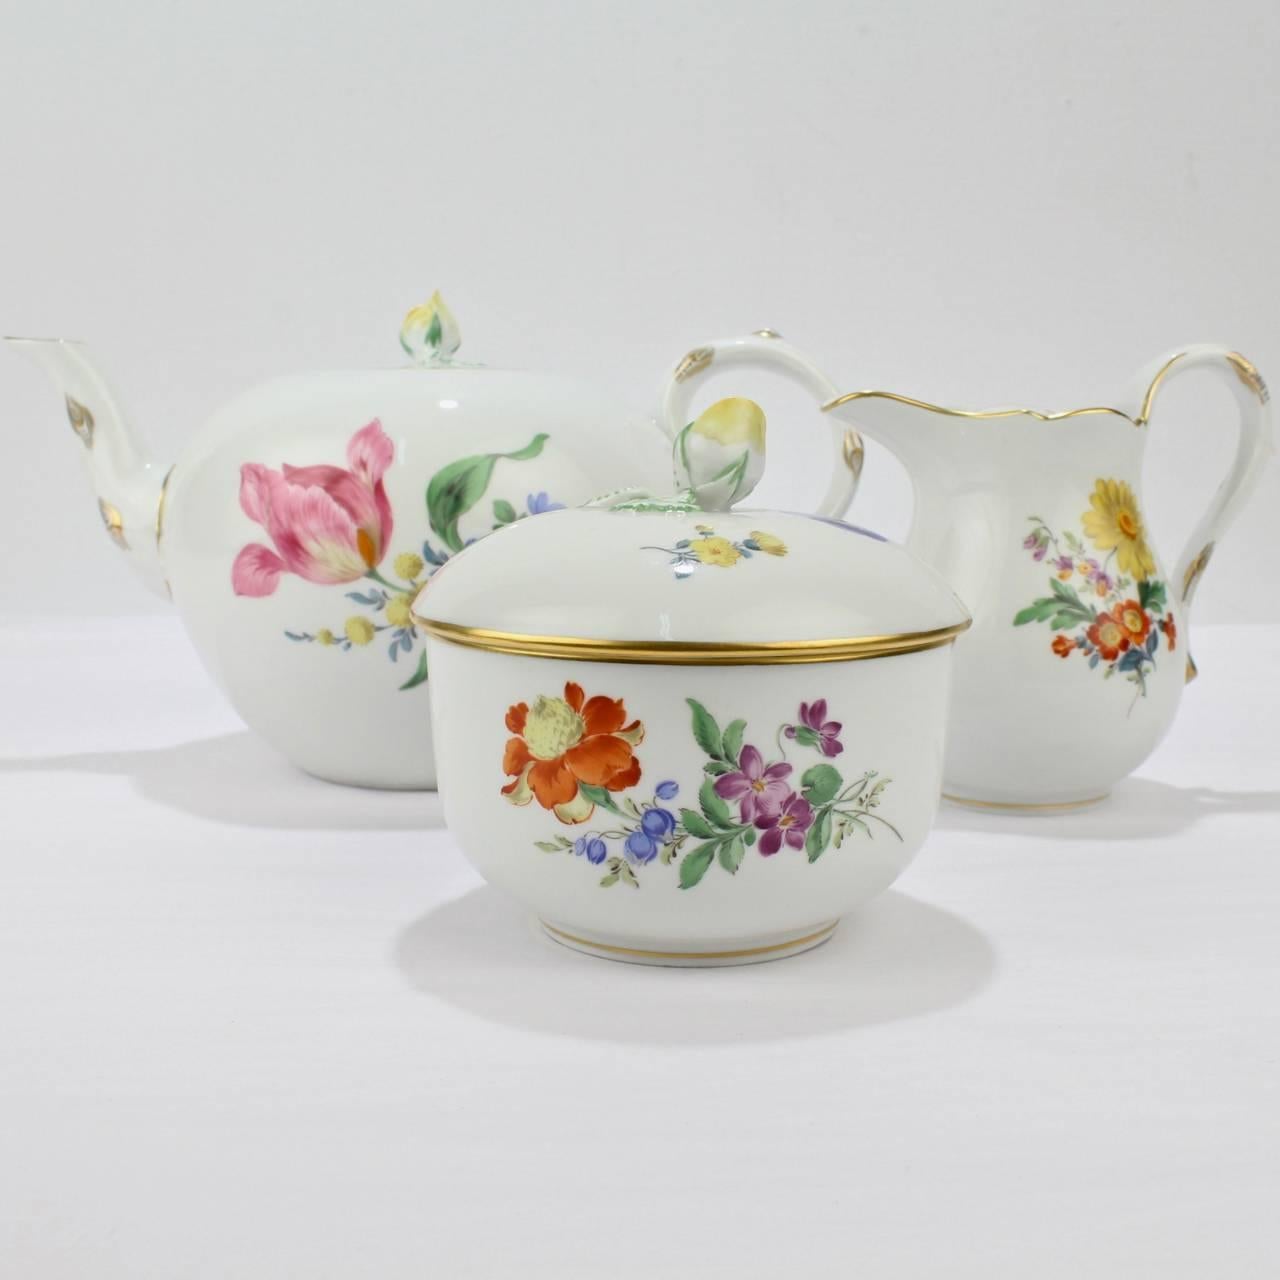 A wonderful vintage Meissen porcelain tea set.

Comprised of a creamer, sugar, and teapot.

Decorated in the Deutsche Blumen manner with polychrome floral sprays.

A picture of refinement and tradition.

Bases bear the blue crossed swords